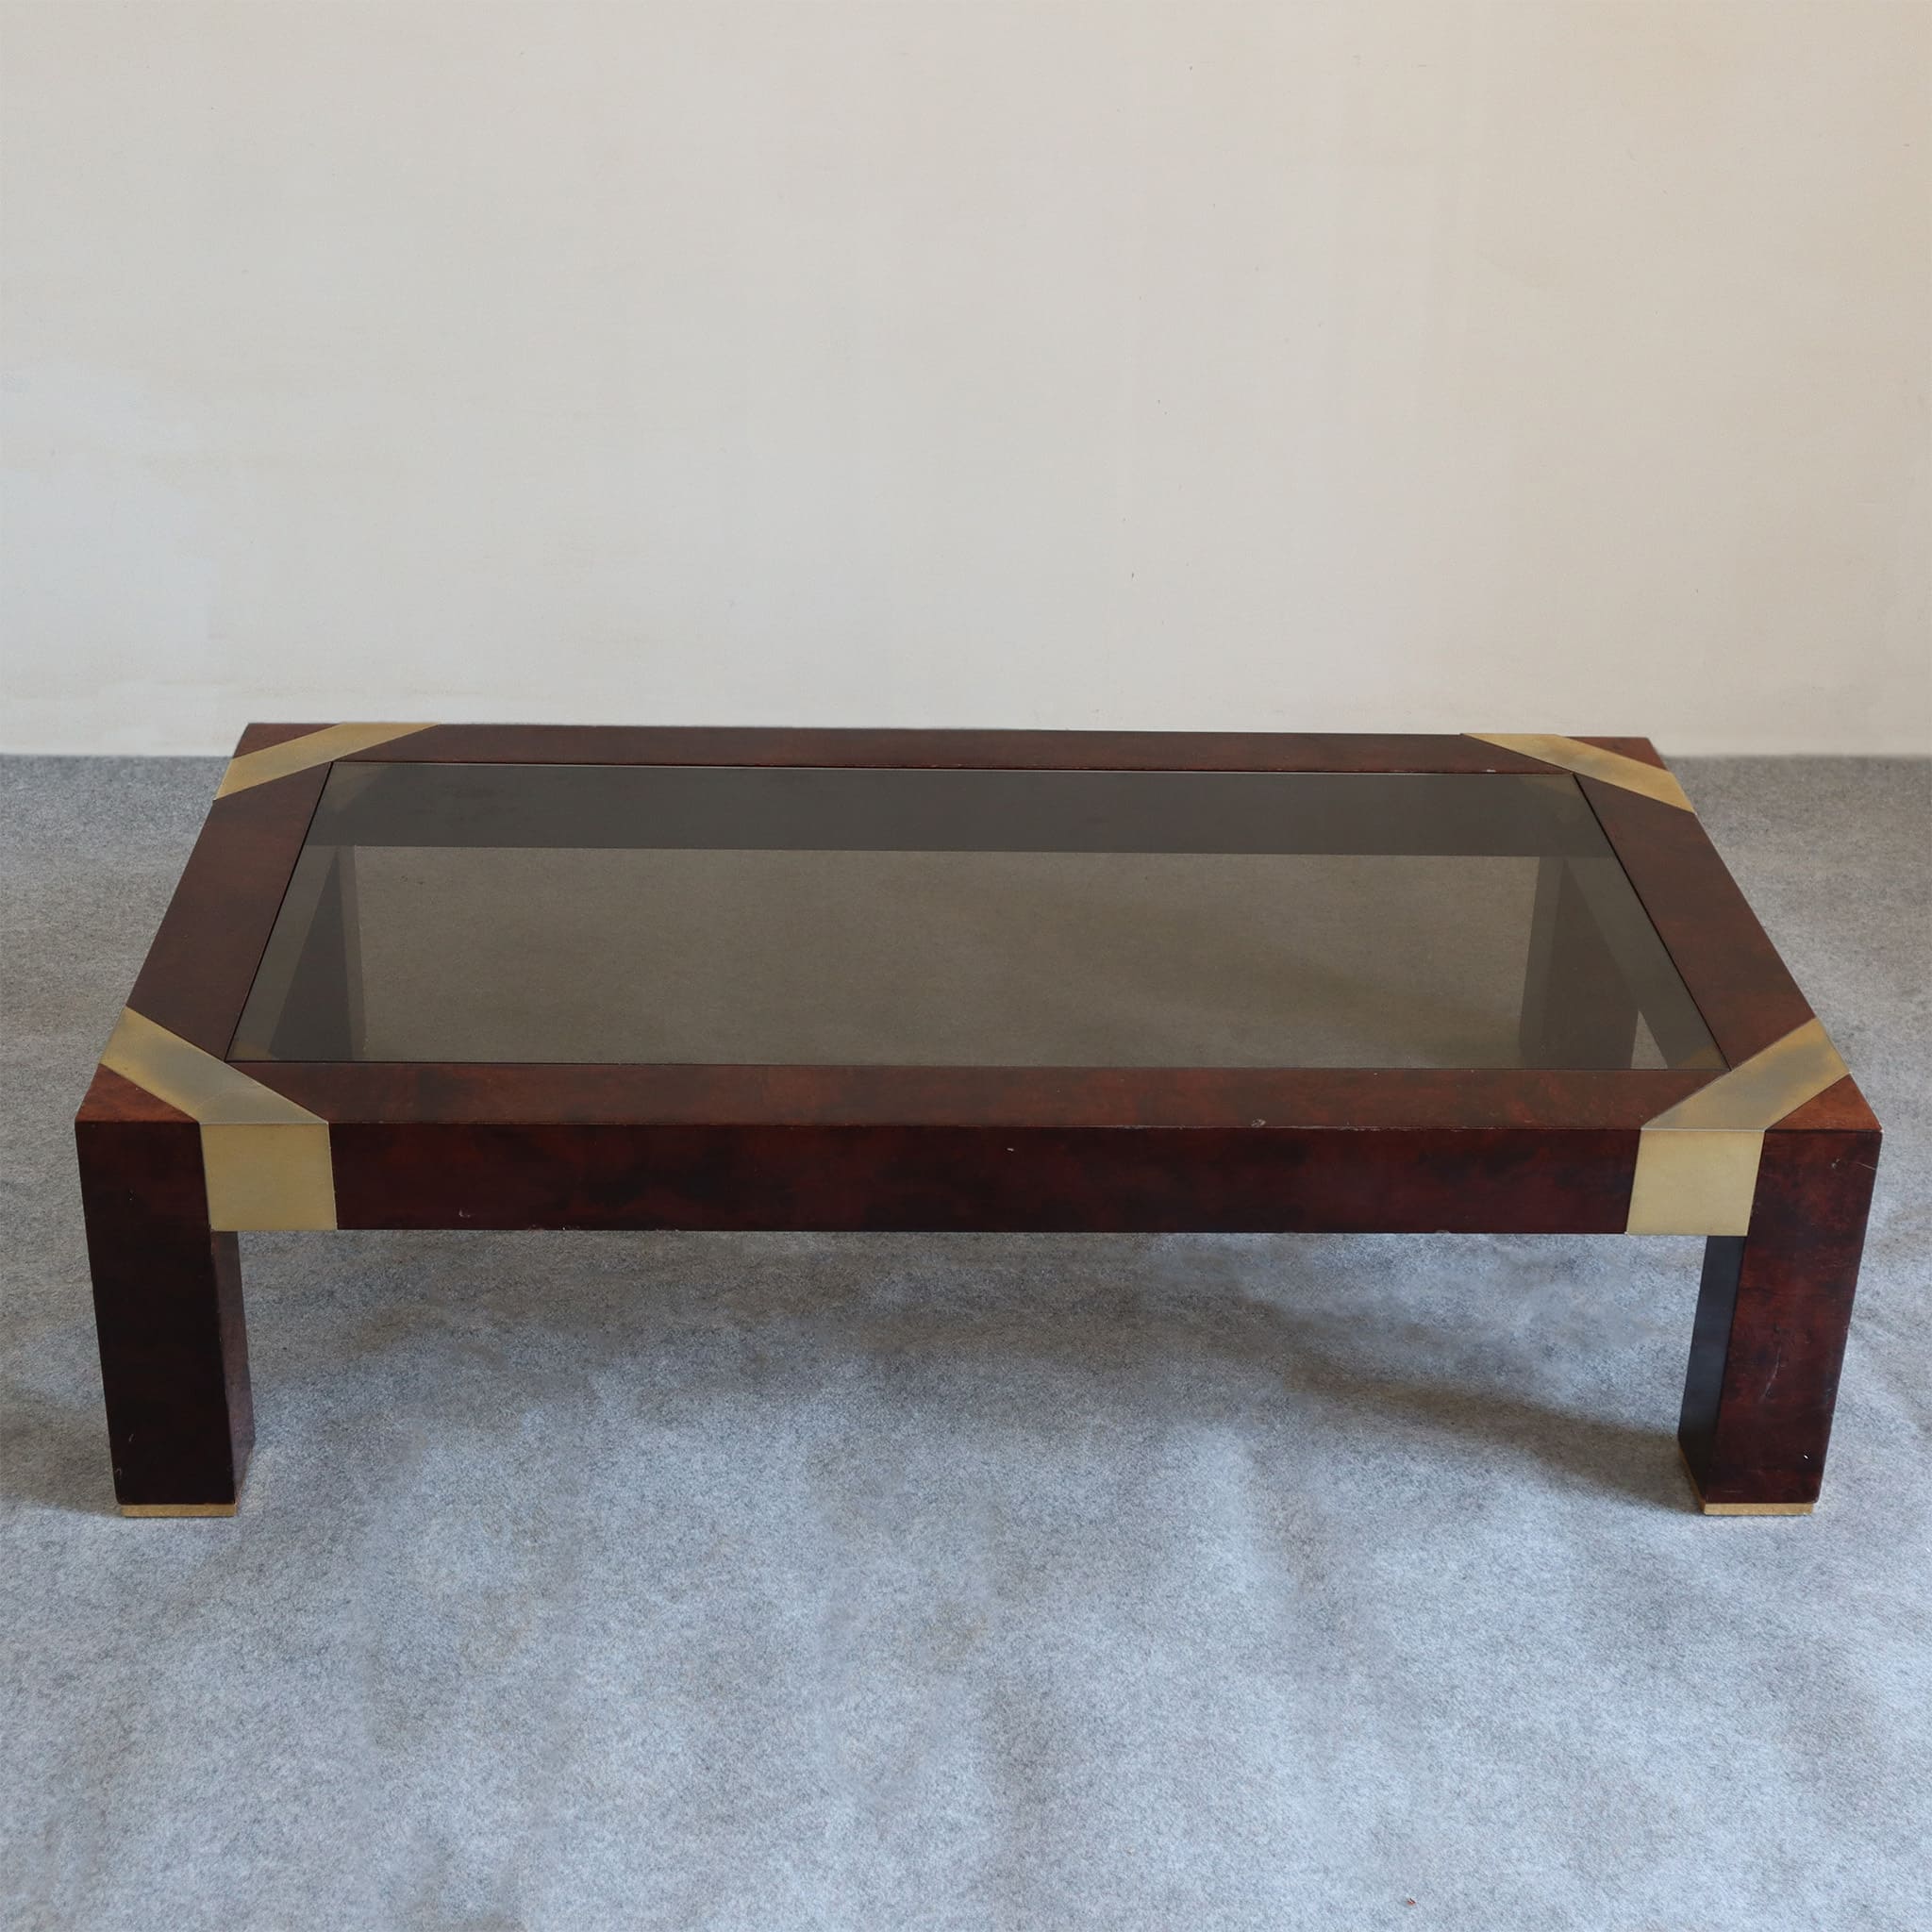 visionidepoca-modern-art-coffee-table-in-briar-and-brass-by-Jean-Claude-Mahey-made-in-france-1970s-front-view